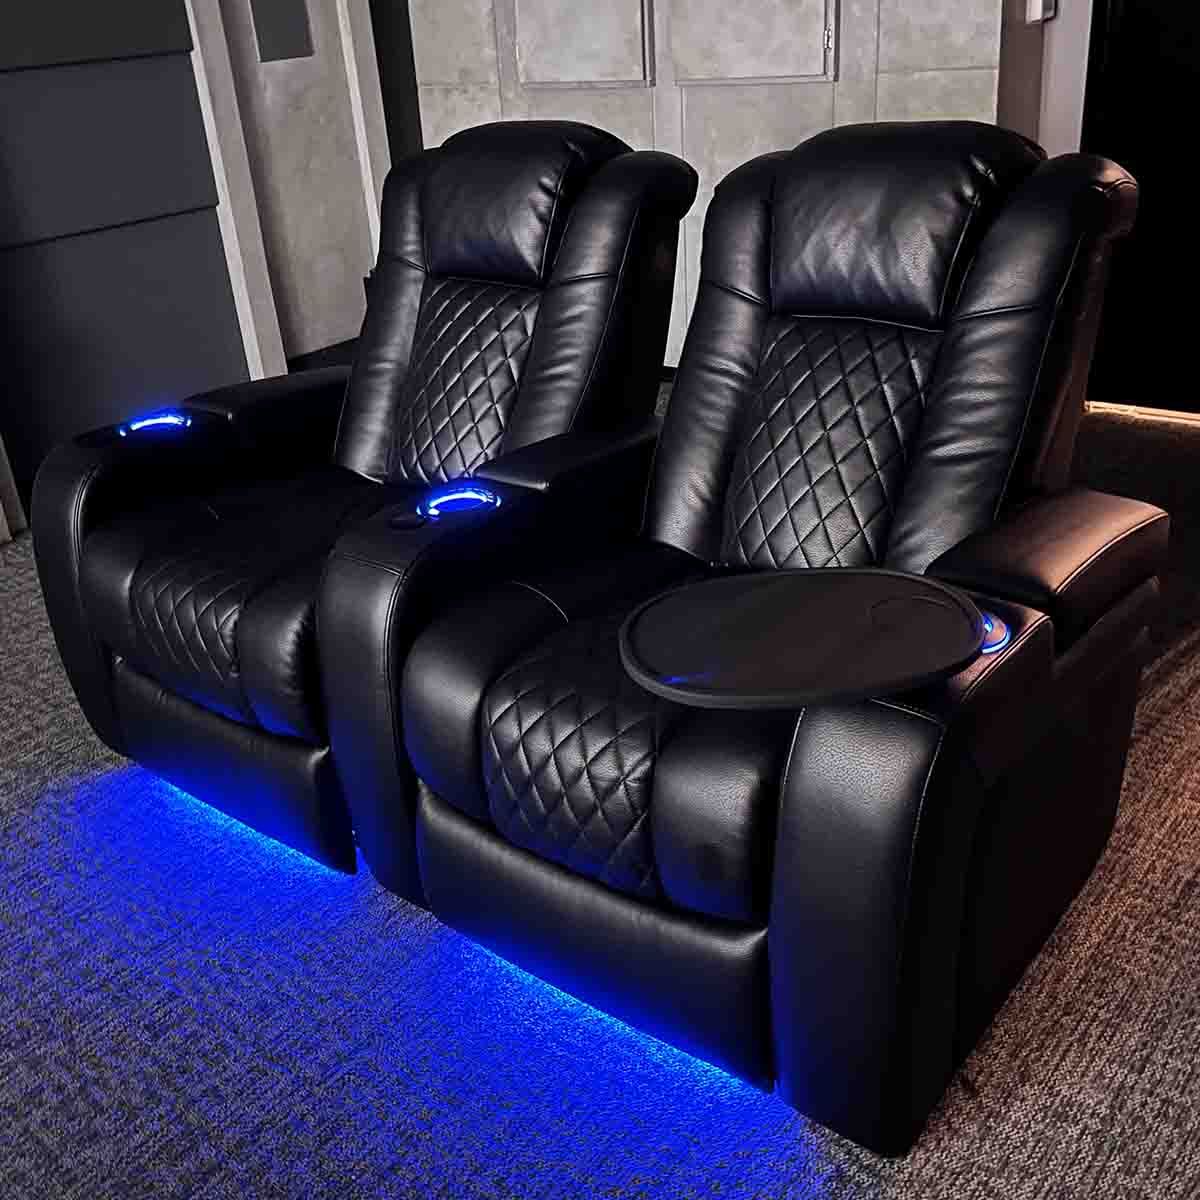 Audio Advice Revelation Home Theater Seating - right angled front view of 2 chair row with tray table and LEDs on